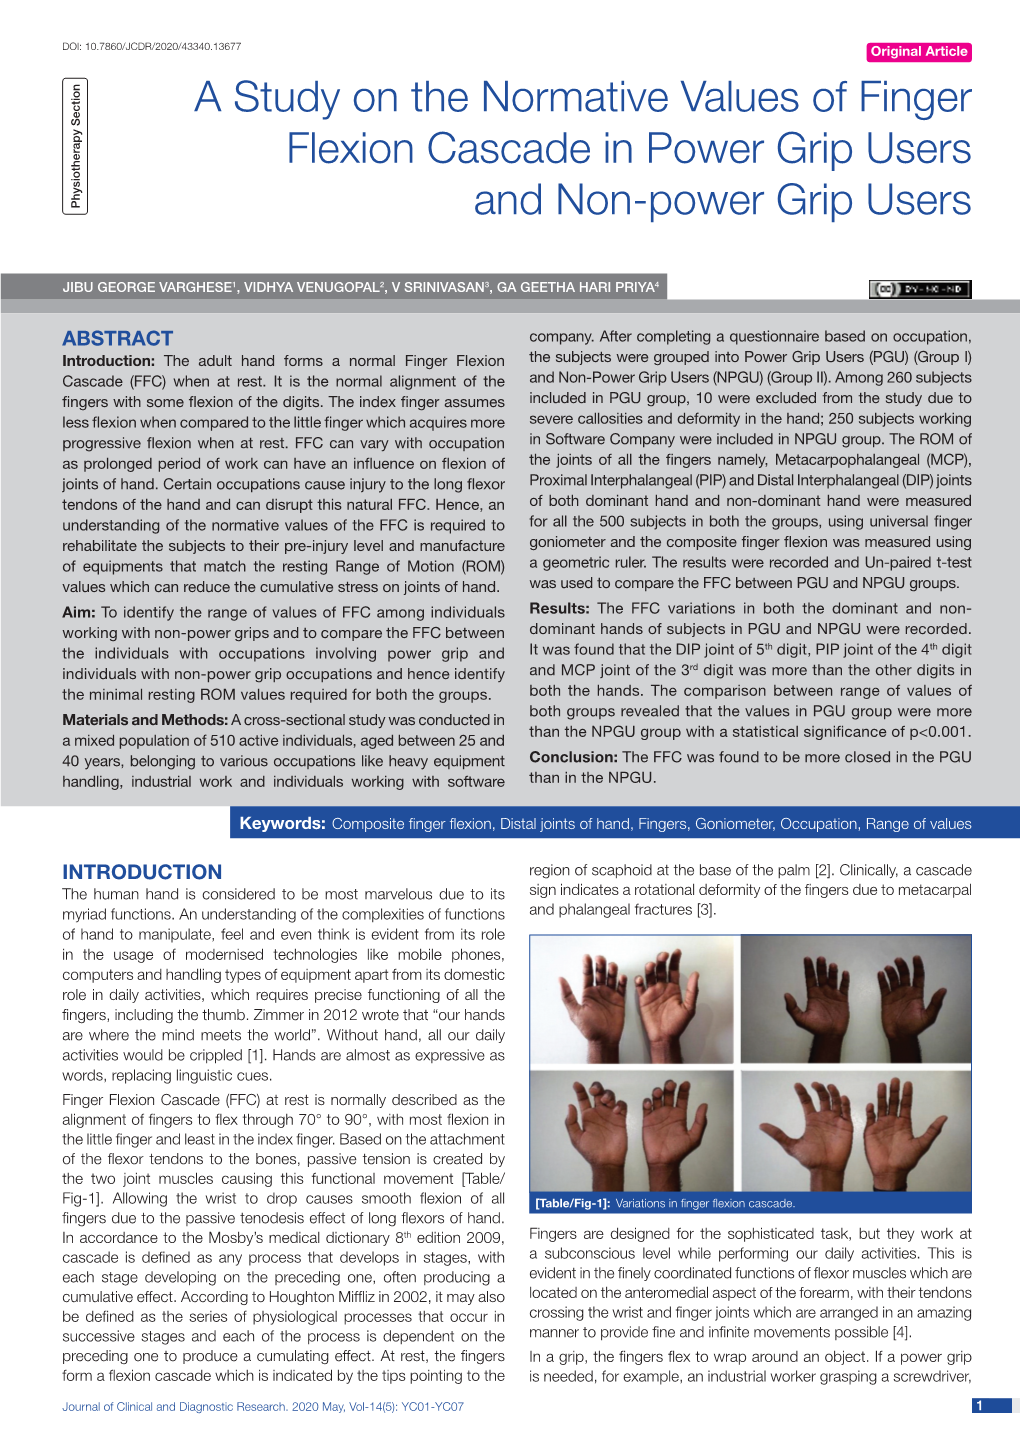 A Study on the Normative Values of Finger Flexion Cascade in Power Grip Users and Non-Power Grip Users